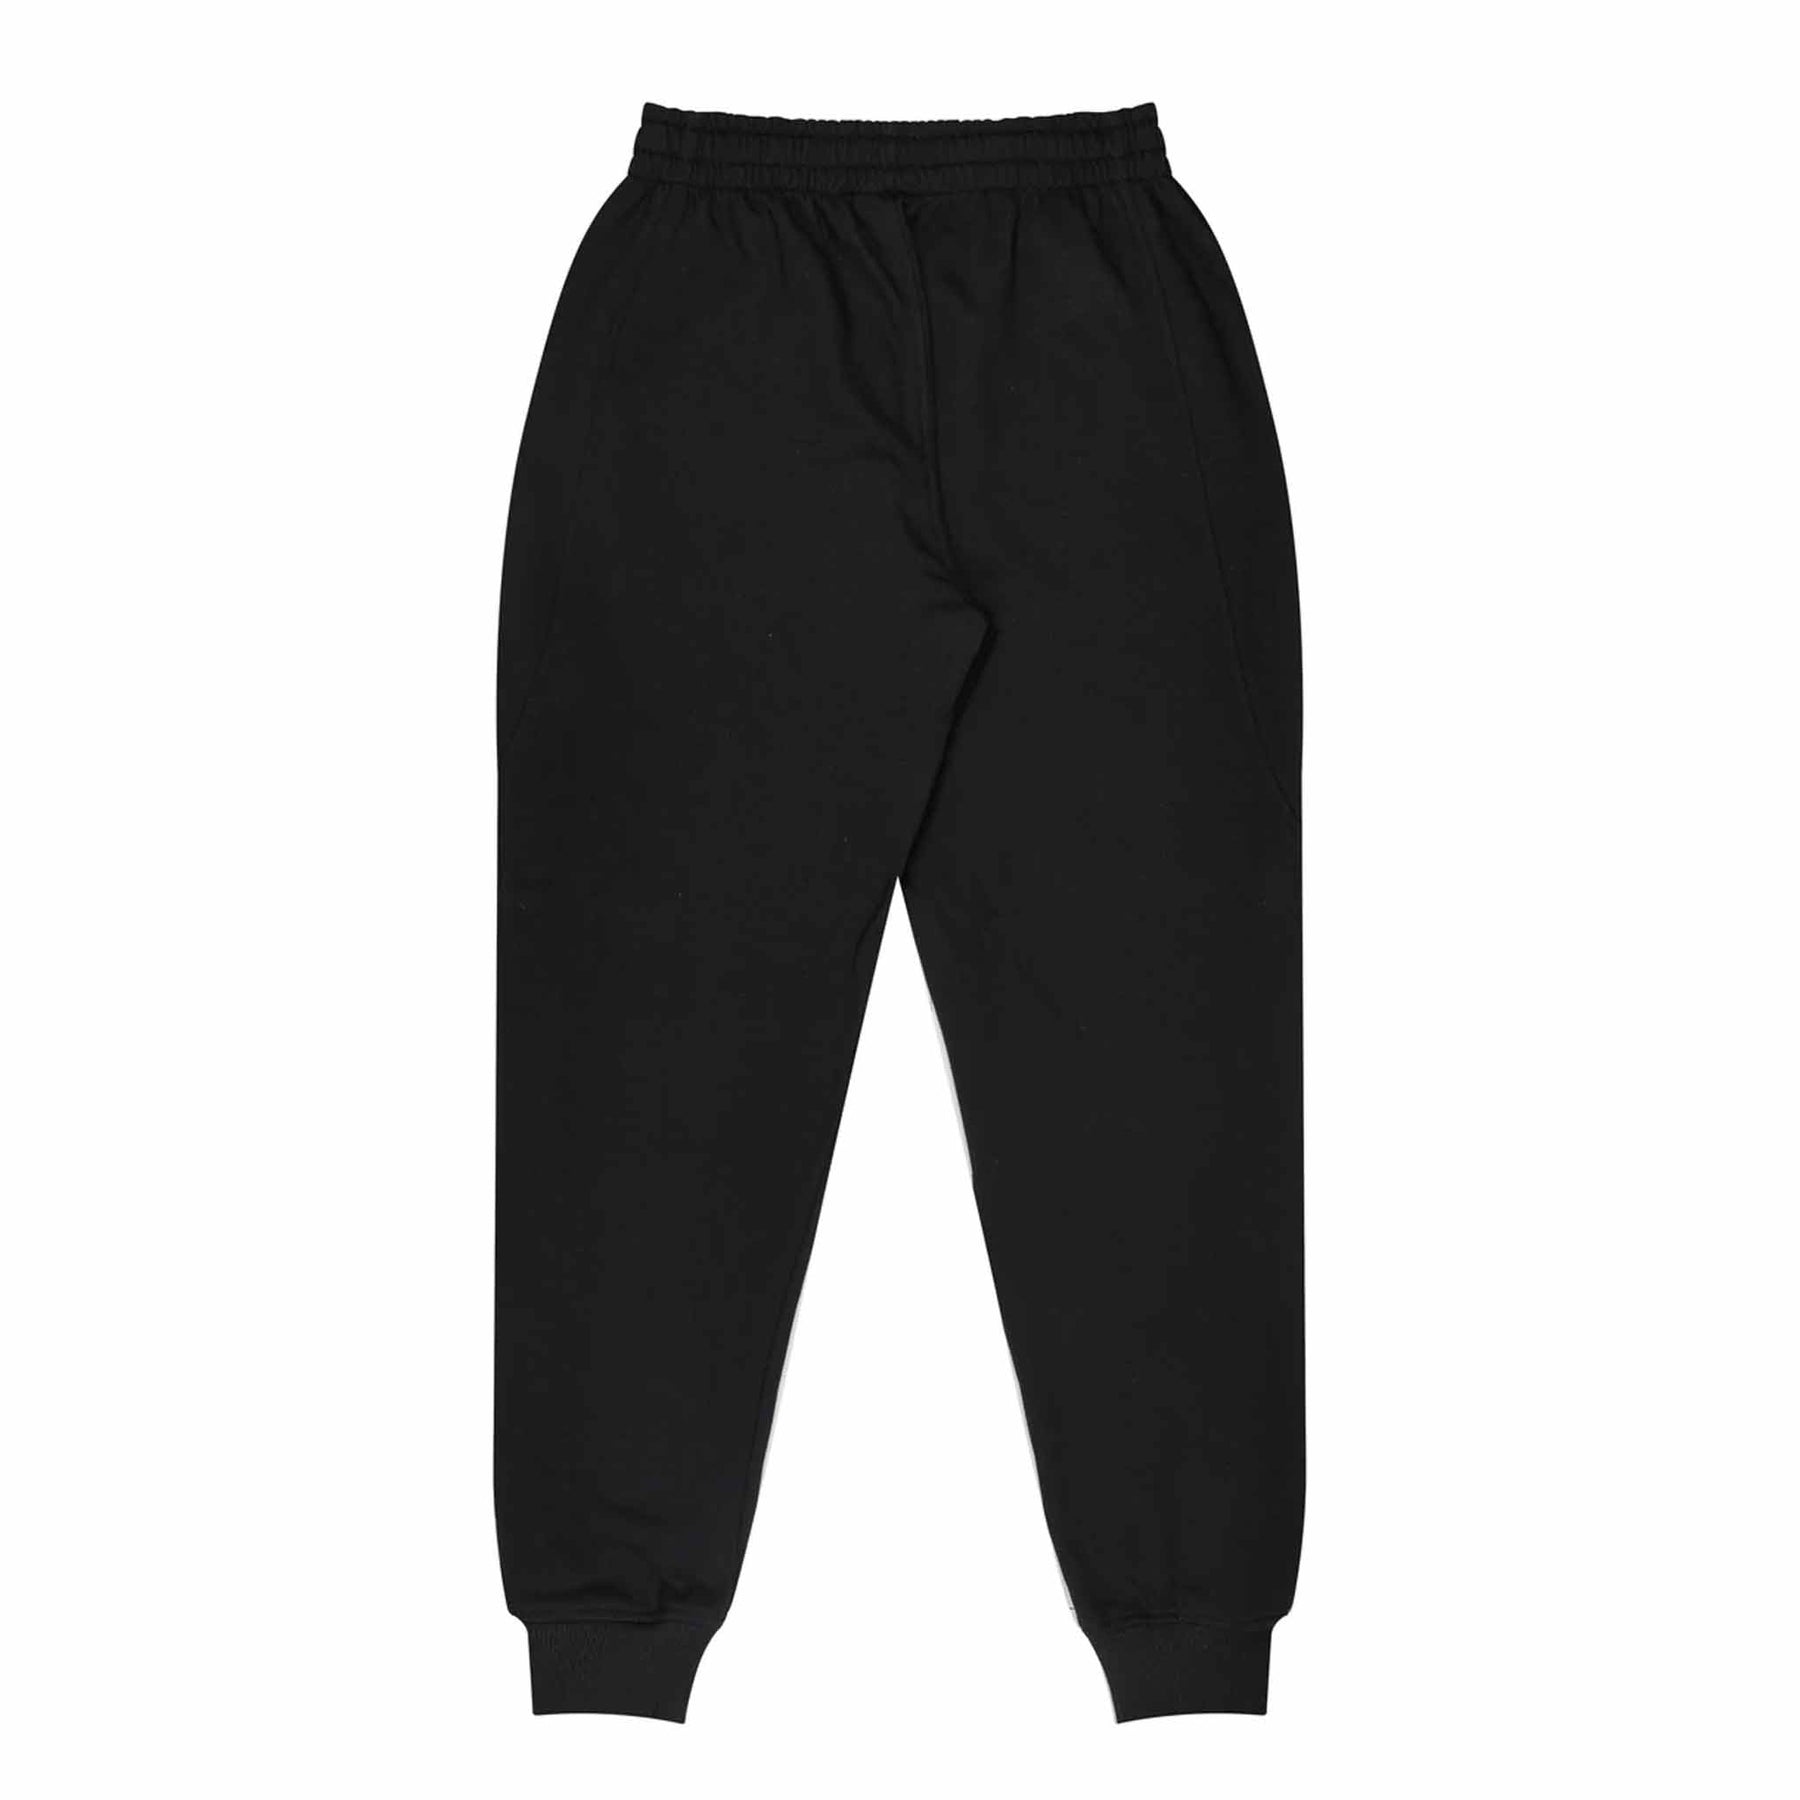 aussie pacific tapered fleece pant in black